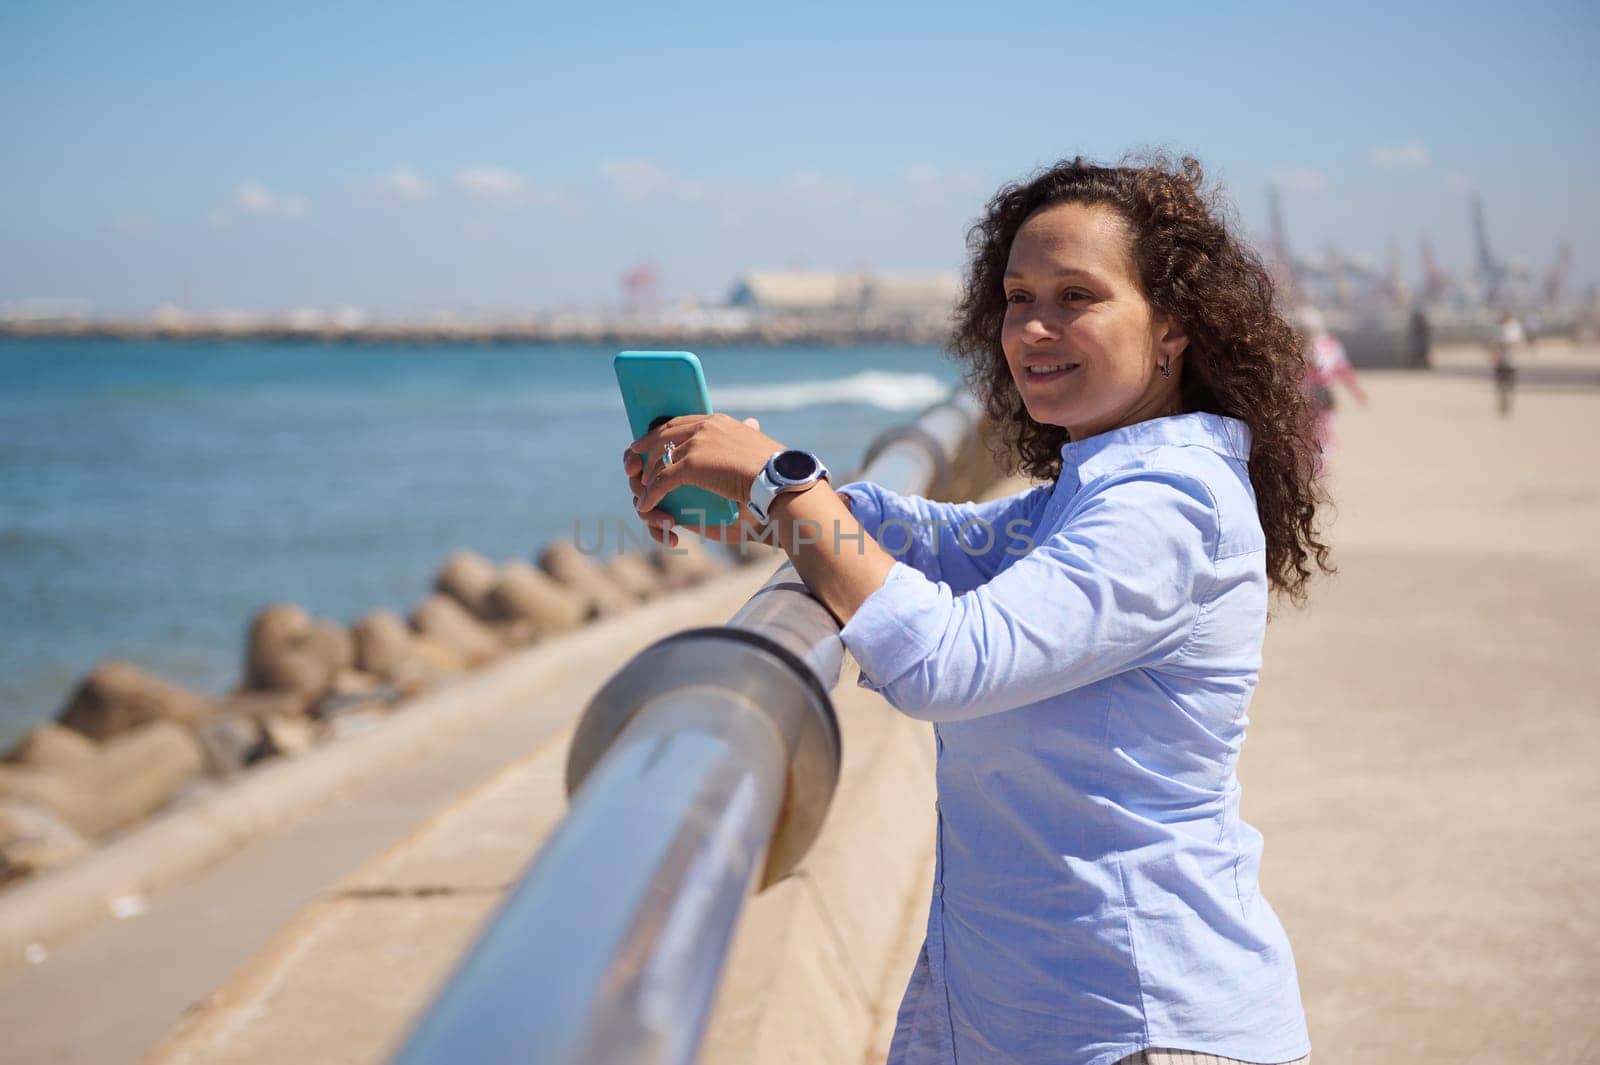 Confident portrait of a smiling pretty woman with mobile phone admiring the beautiful seascape, standing at seacoast on sunny summer day. People. Digital technology. Online communication